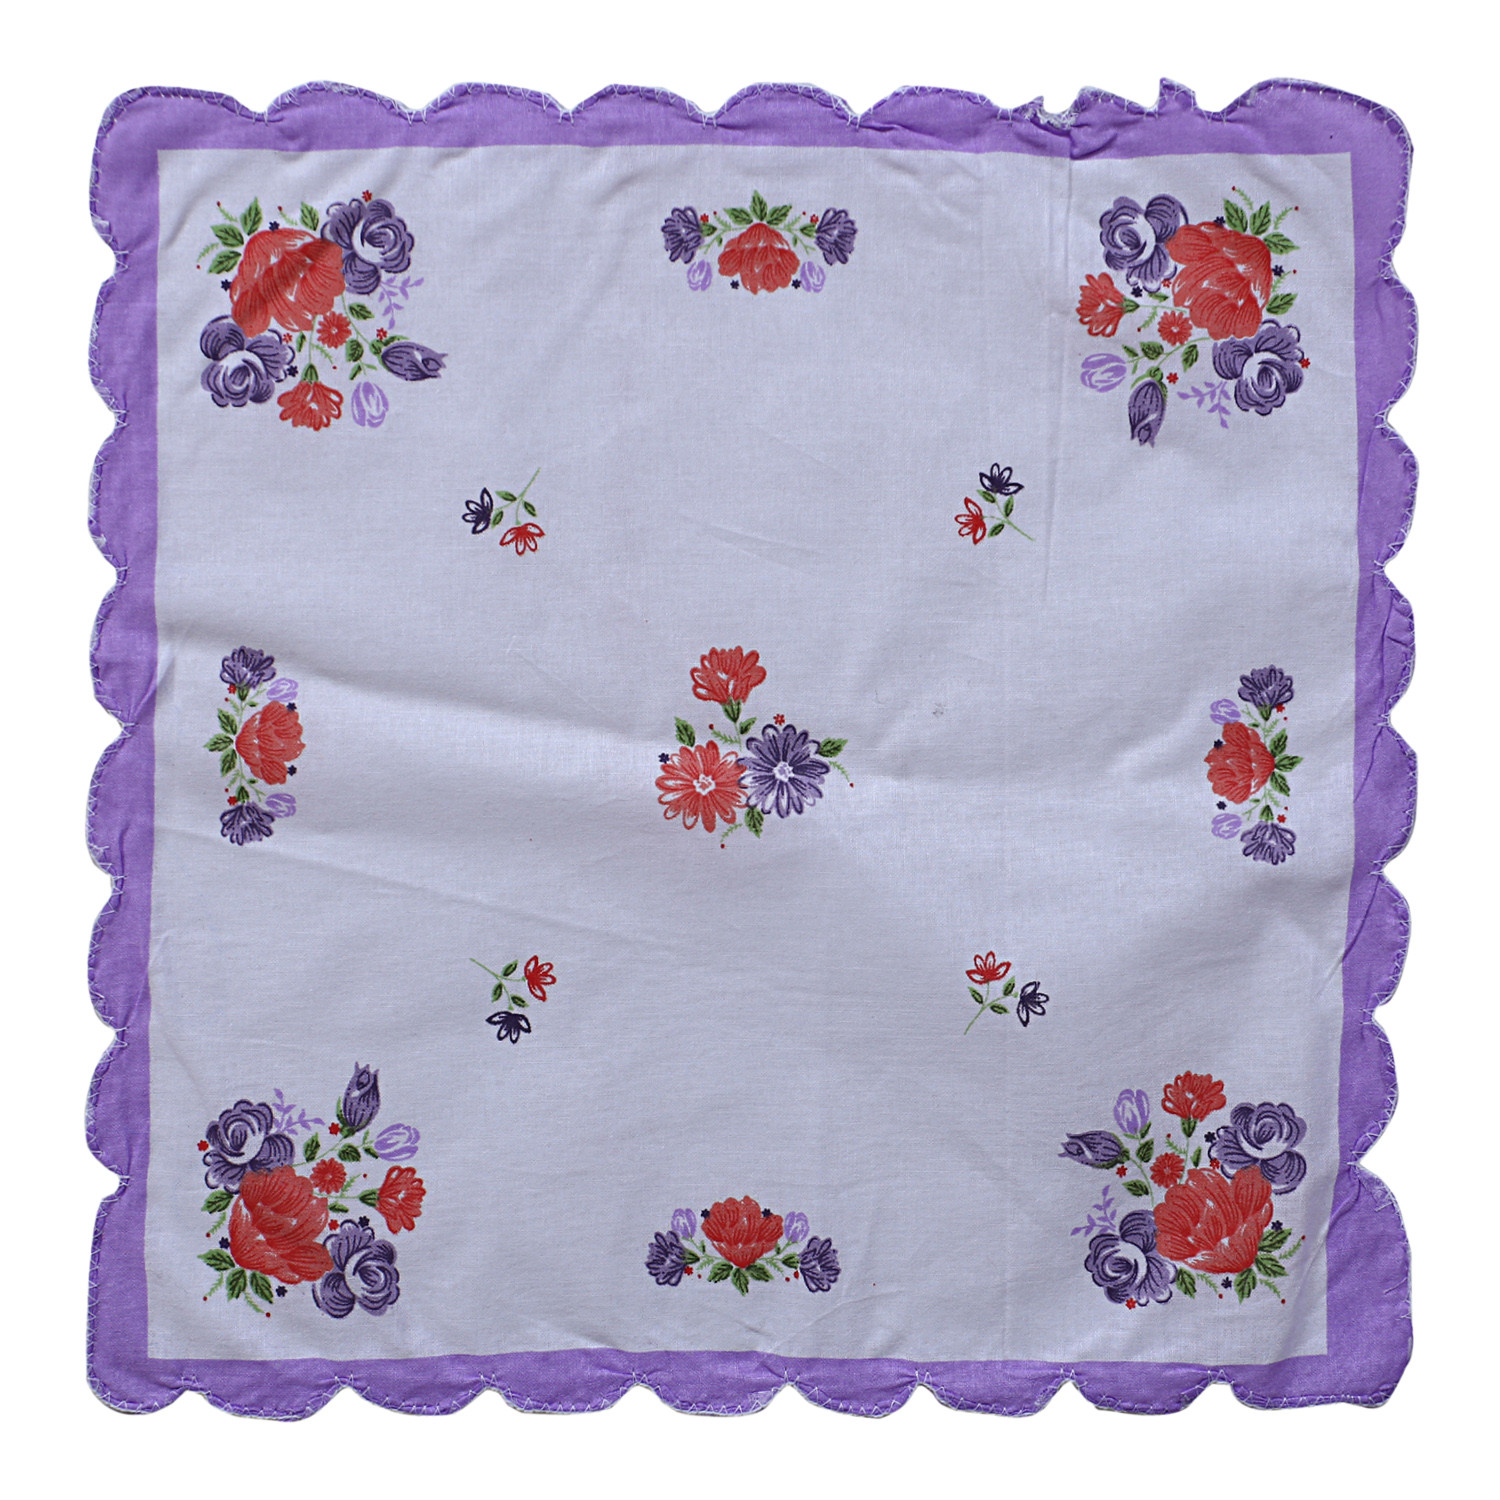 Kuber Industries Handkerchiefs|Multicolored Floral Print Cutwork Soft Cotton Hankies For Woman,Girls & Wicking Sweat from Hands,Face,Set of 12 (Multicolor)